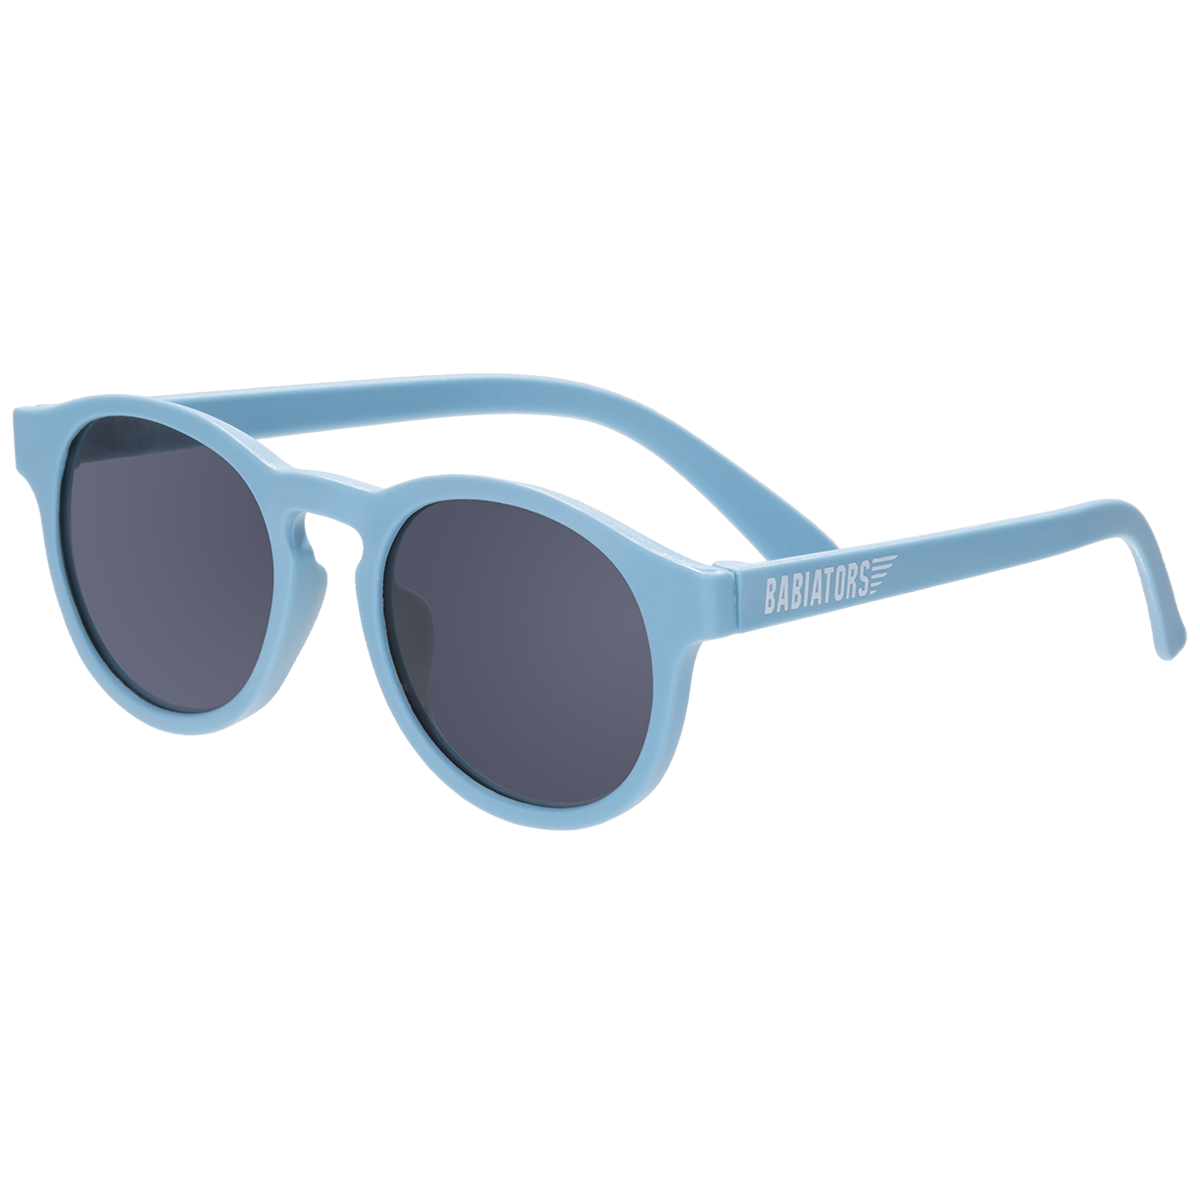 Up in the Air Keyhole Sunglasses  - Doodlebug's Children's Boutique